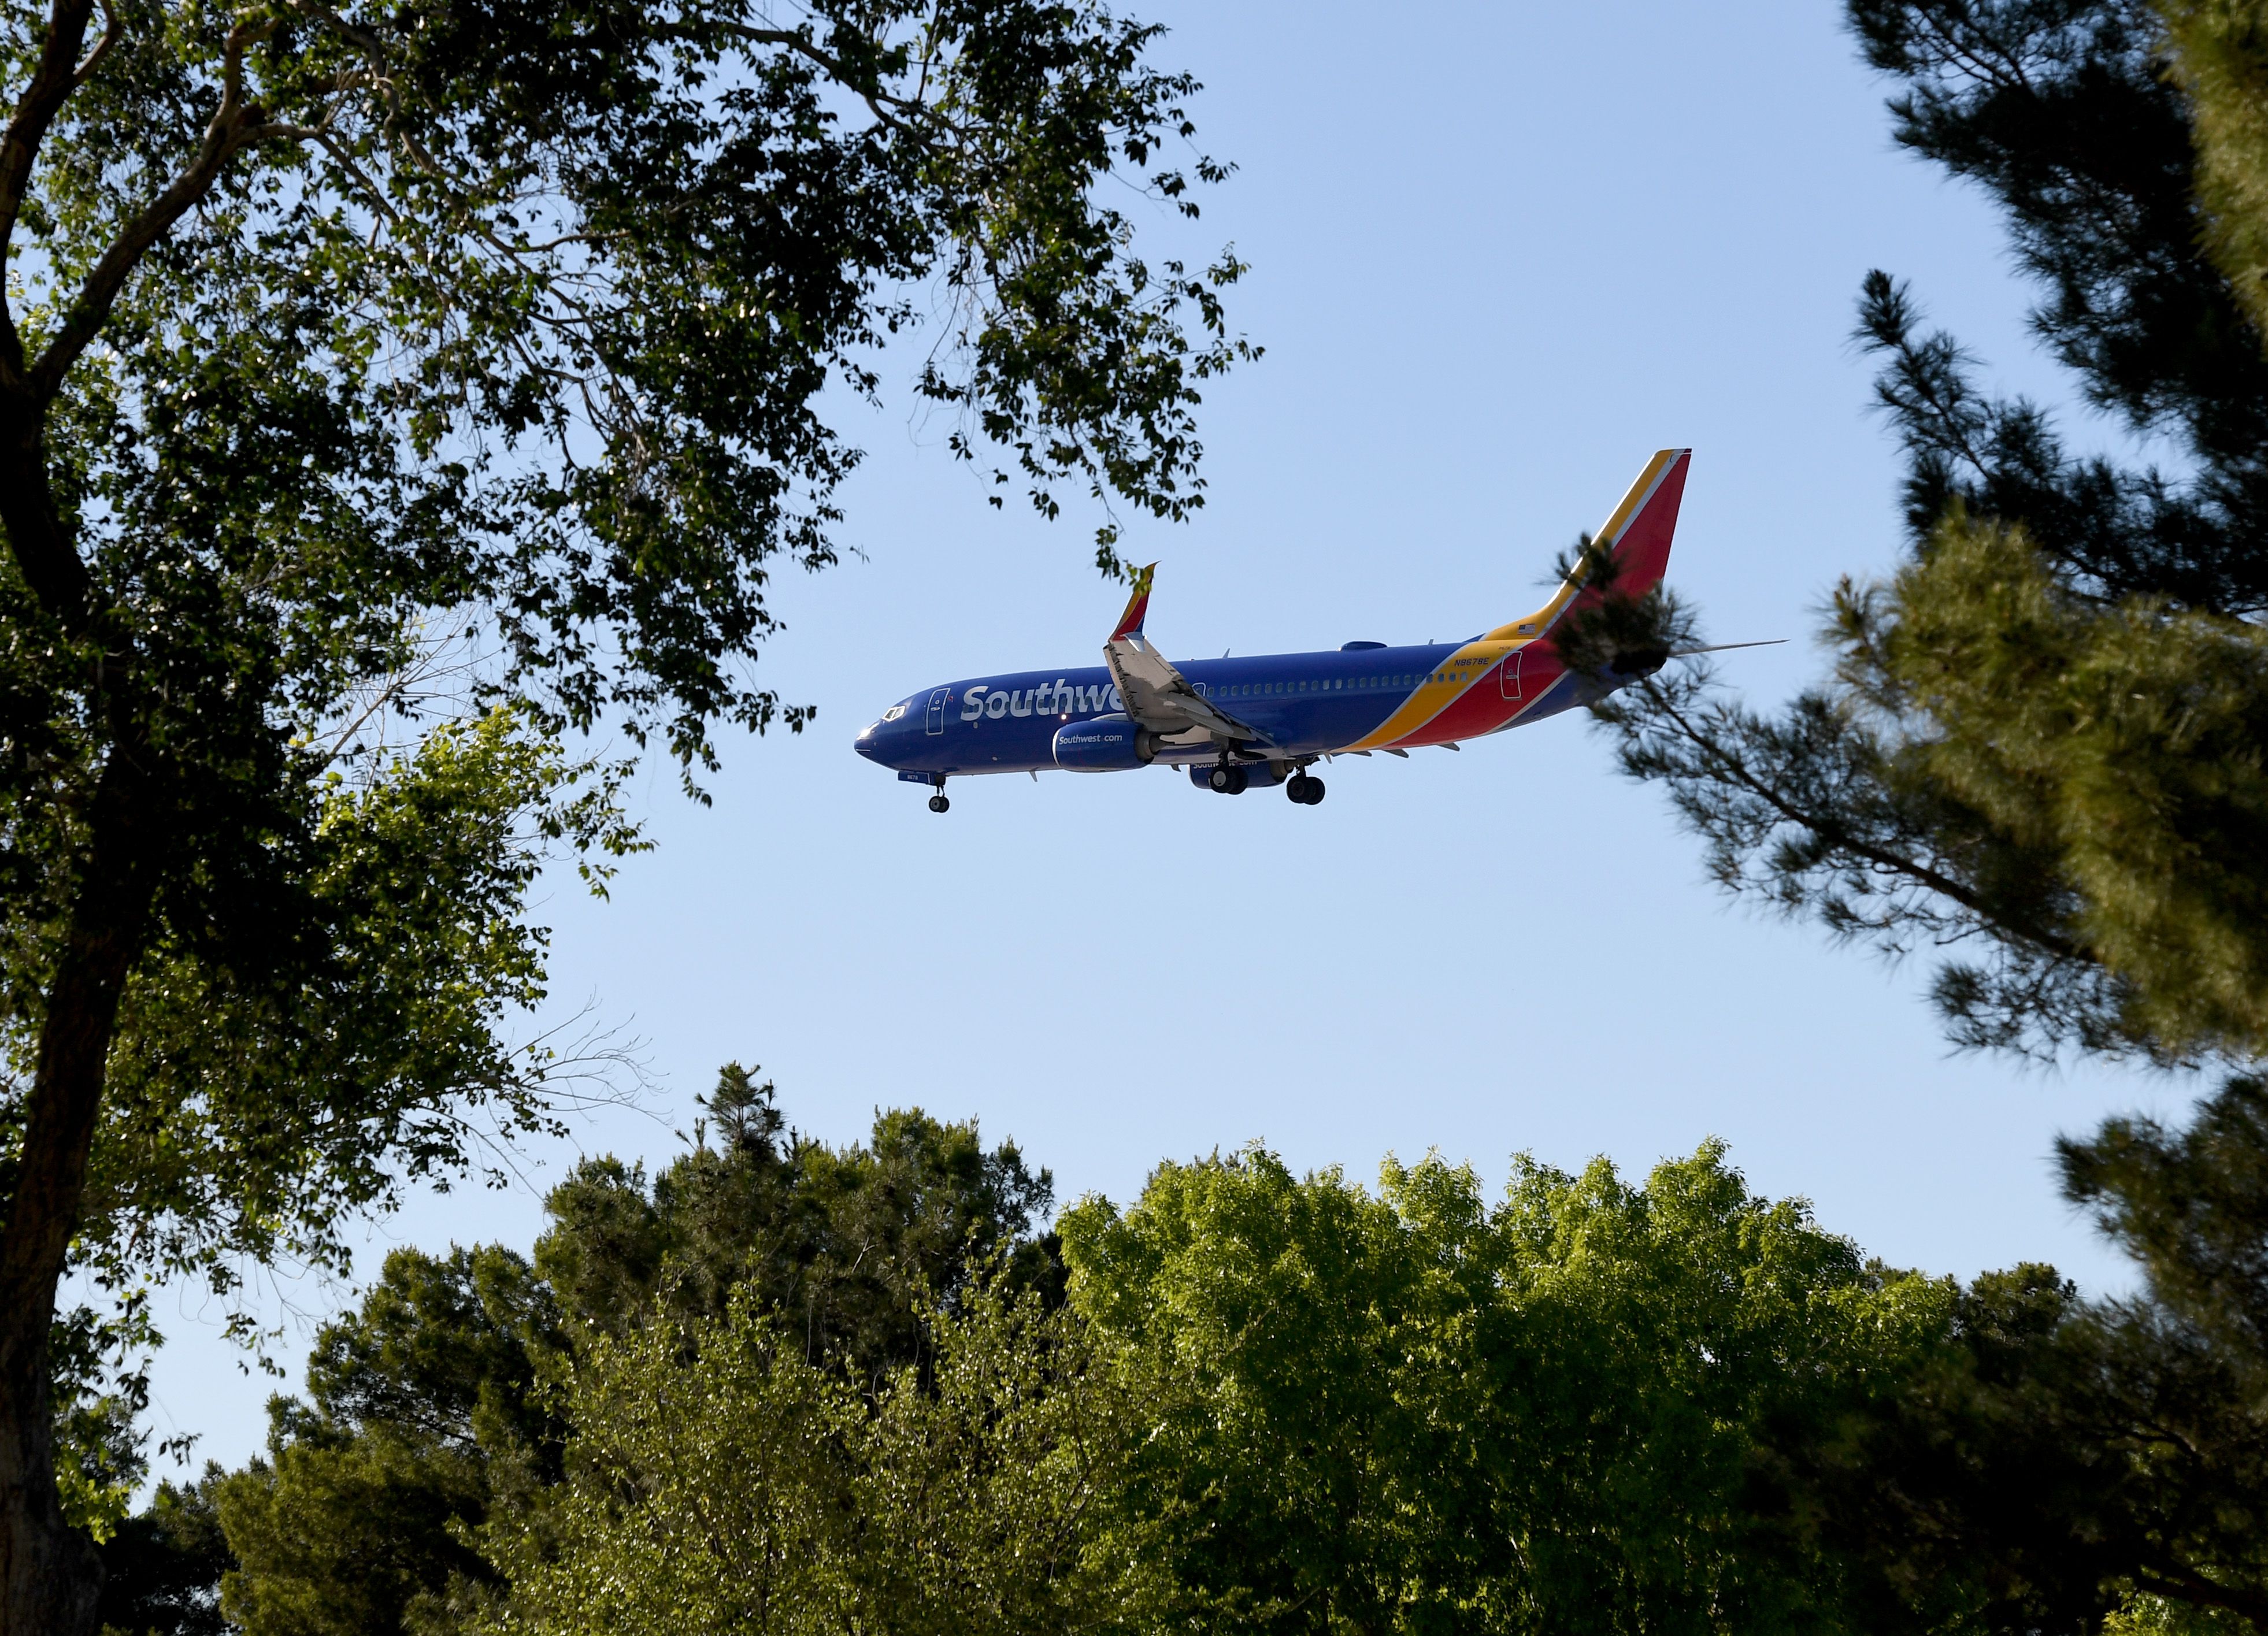 Southwest Boeing 737 seen through trees as it comes in for landing